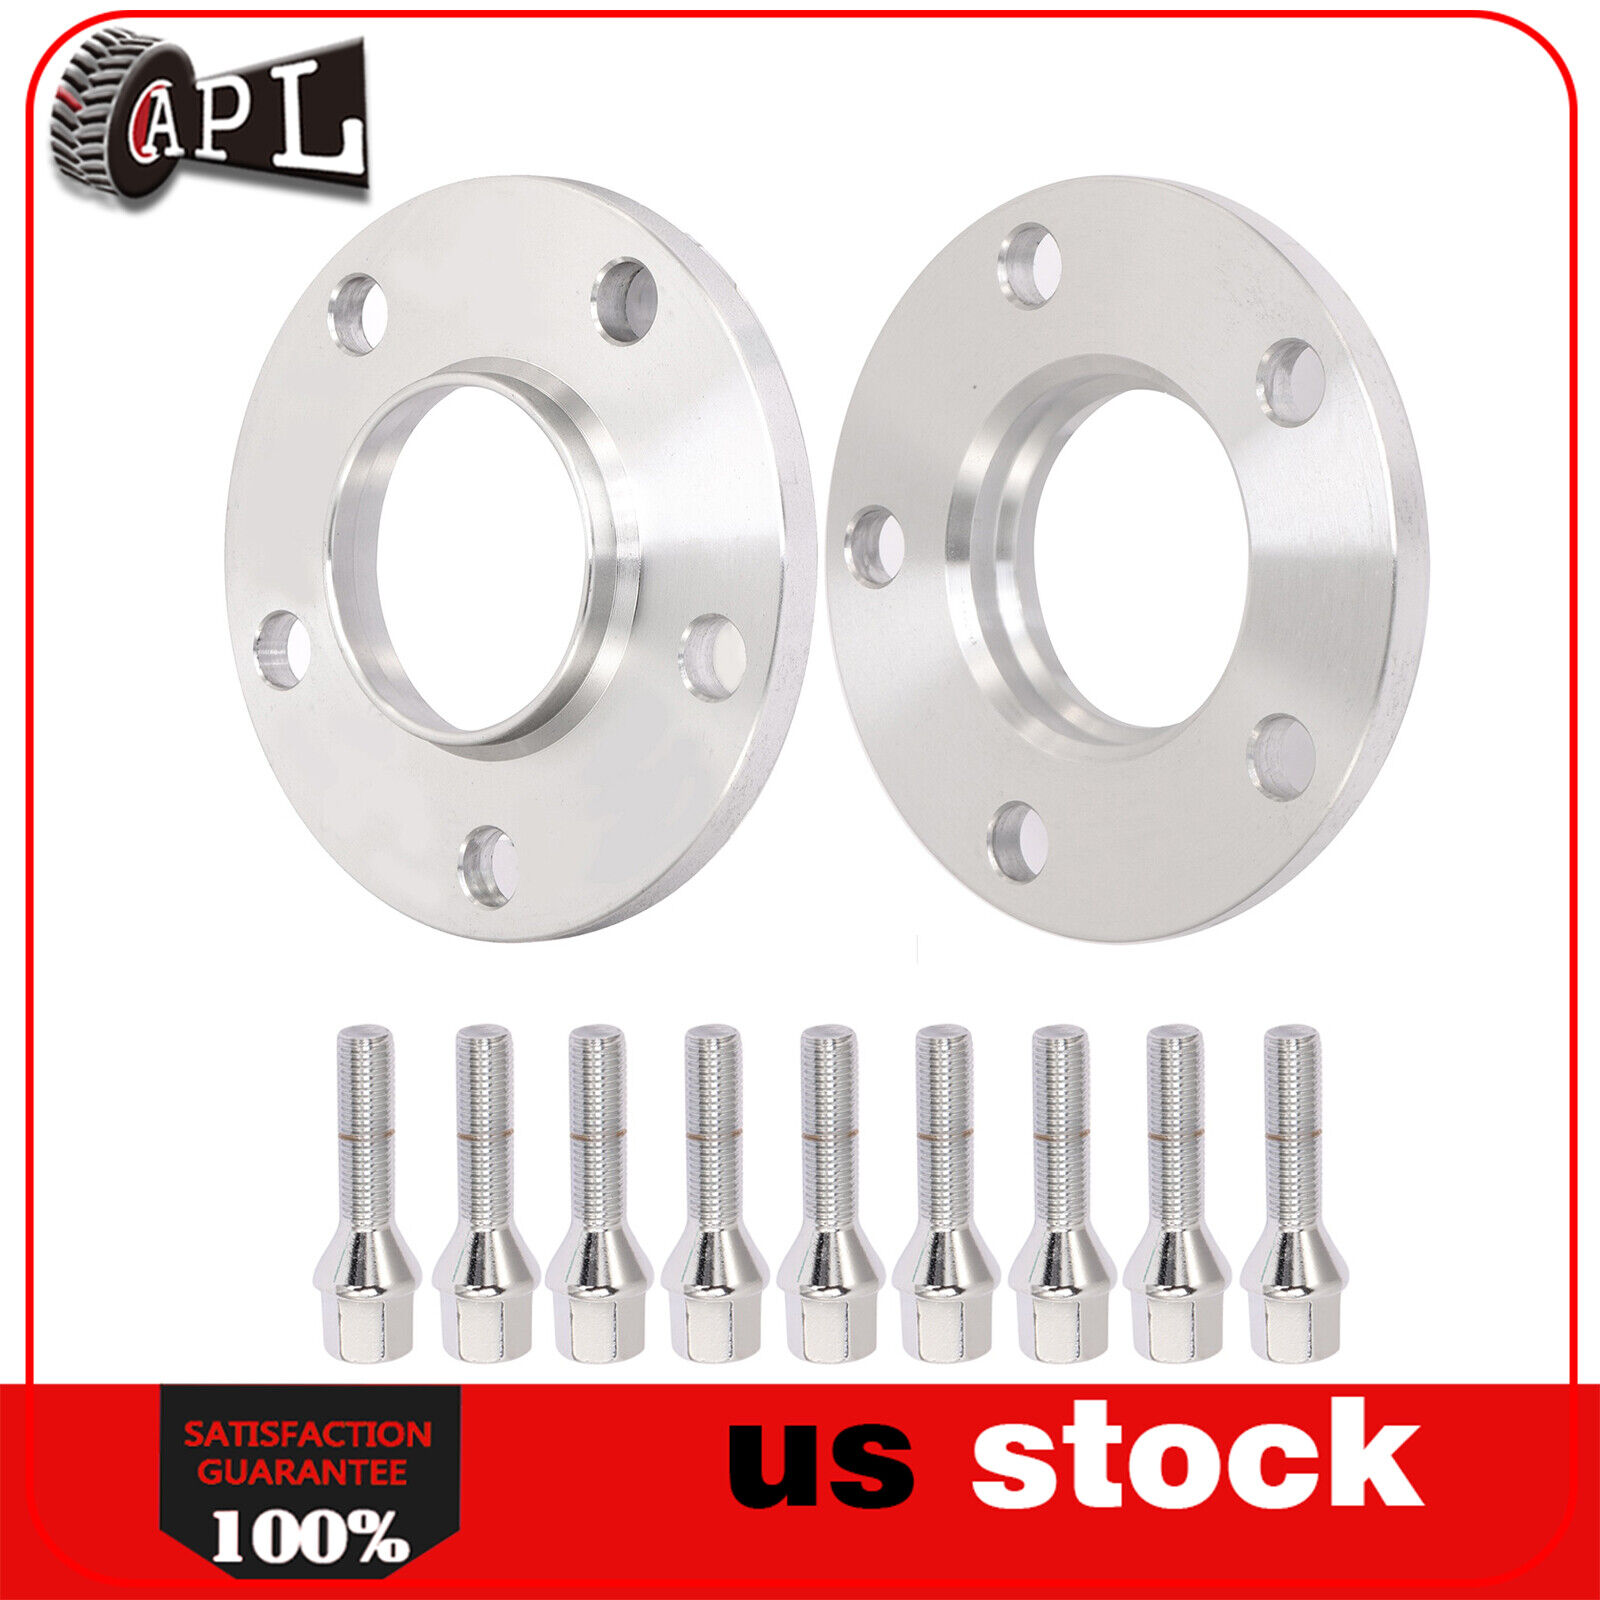 2pcs 10mm Thick 5x120 HubCentric Wheel Spacers For BMW E88 135i 1M COUPE 645Ci